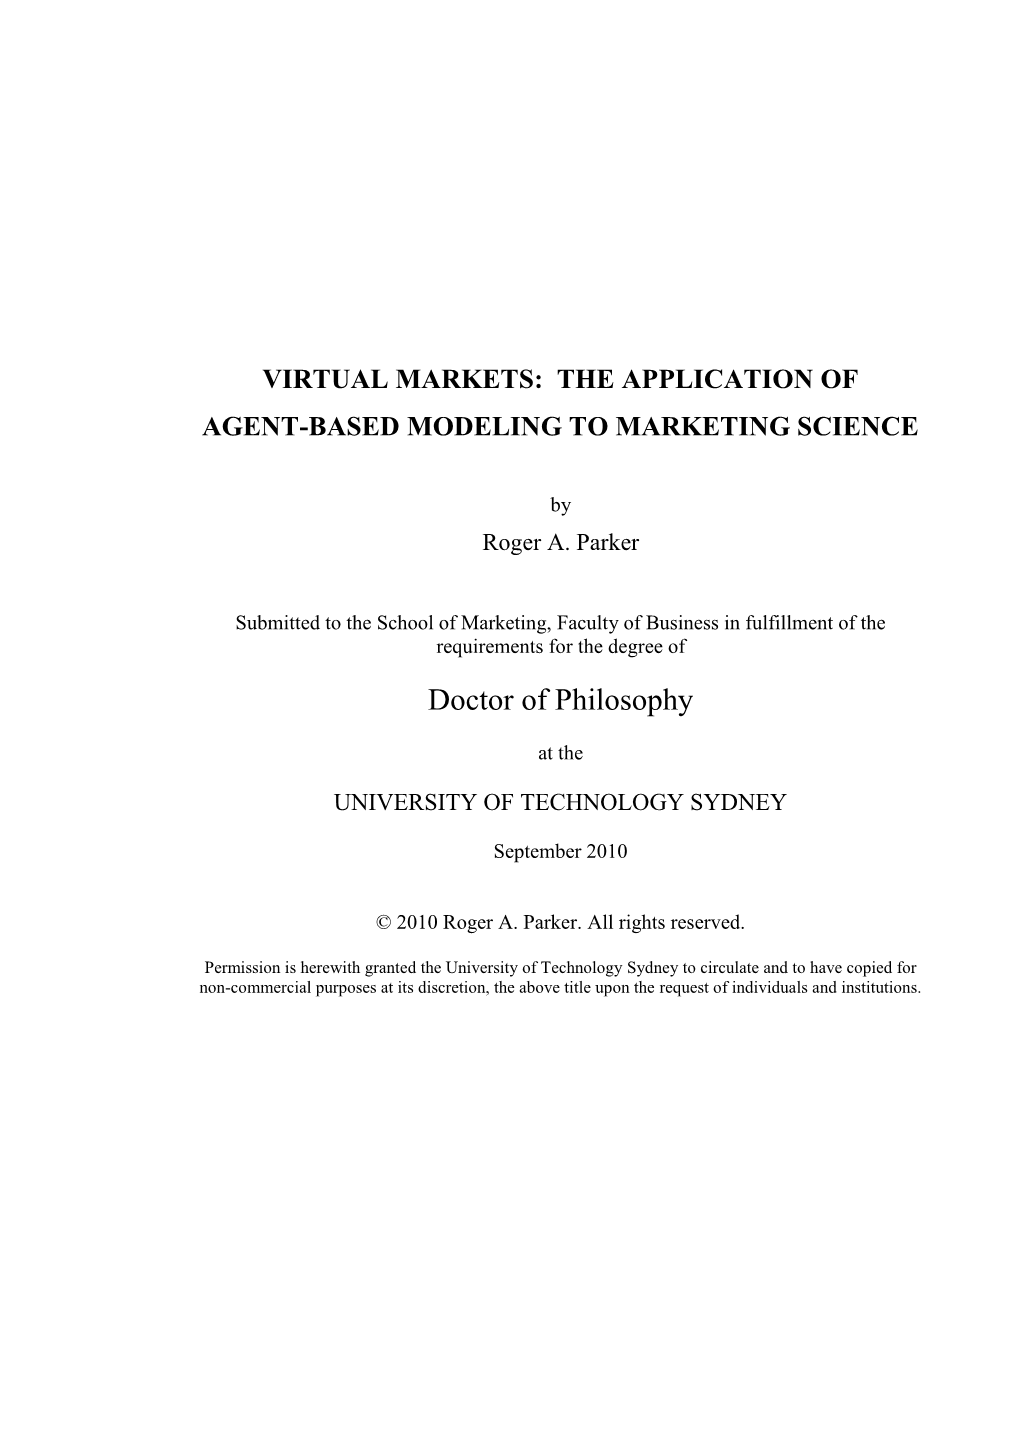 The Application of Agent-Based Models to Marketing Science I Refer to As Virtual Markets